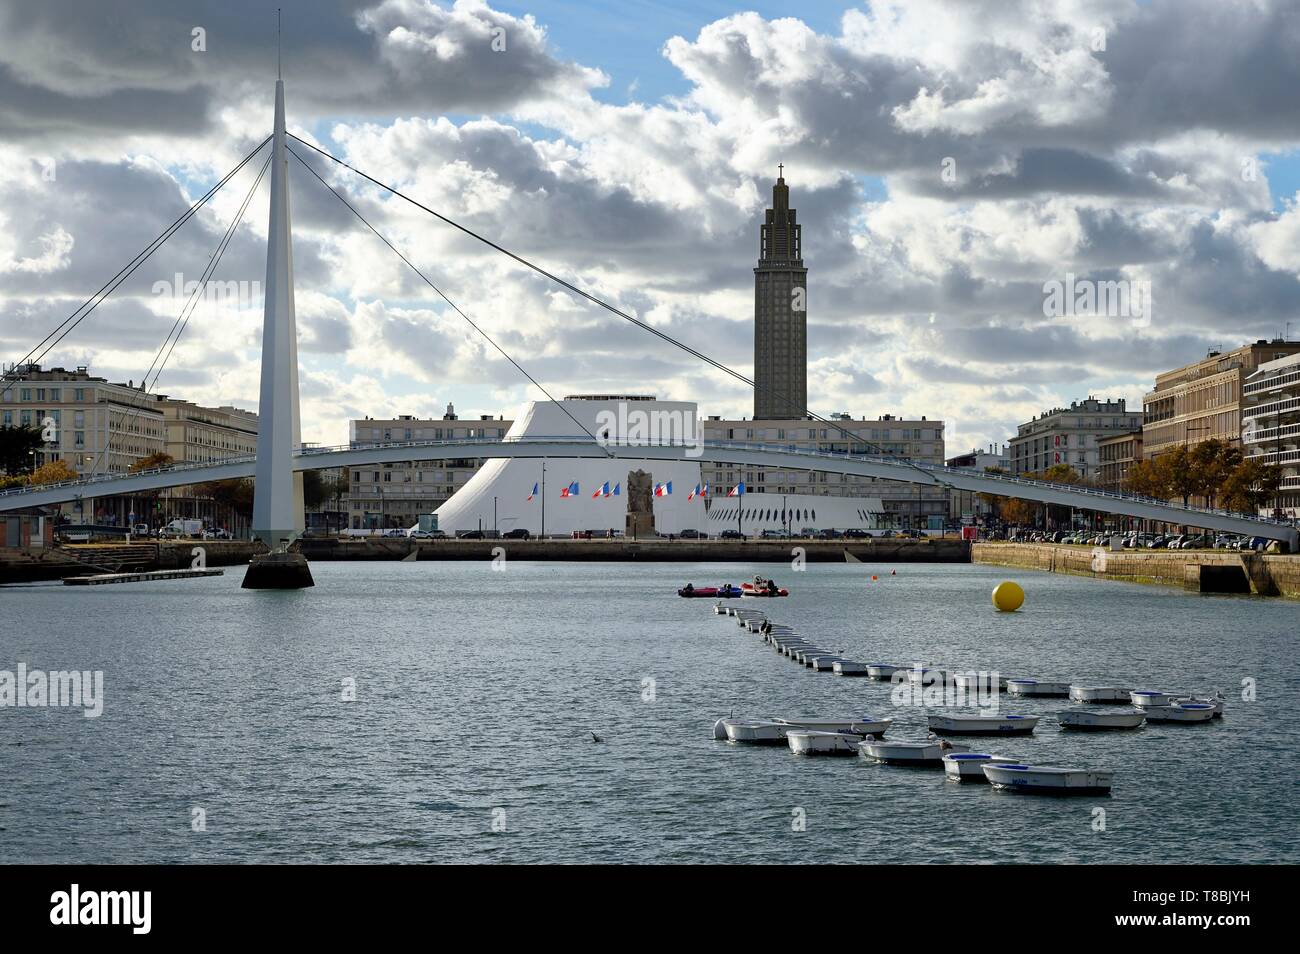 France, Seine Maritime, Le Havre, Downtown rebuilt by Auguste Perret listed as World Heritage by UNESCO, Perret buildings around the Bassin du Commerce, the footbridge, the Volcan created by Oscar Niemeyer and the Lantern tower of Saint Joseph church Stock Photo